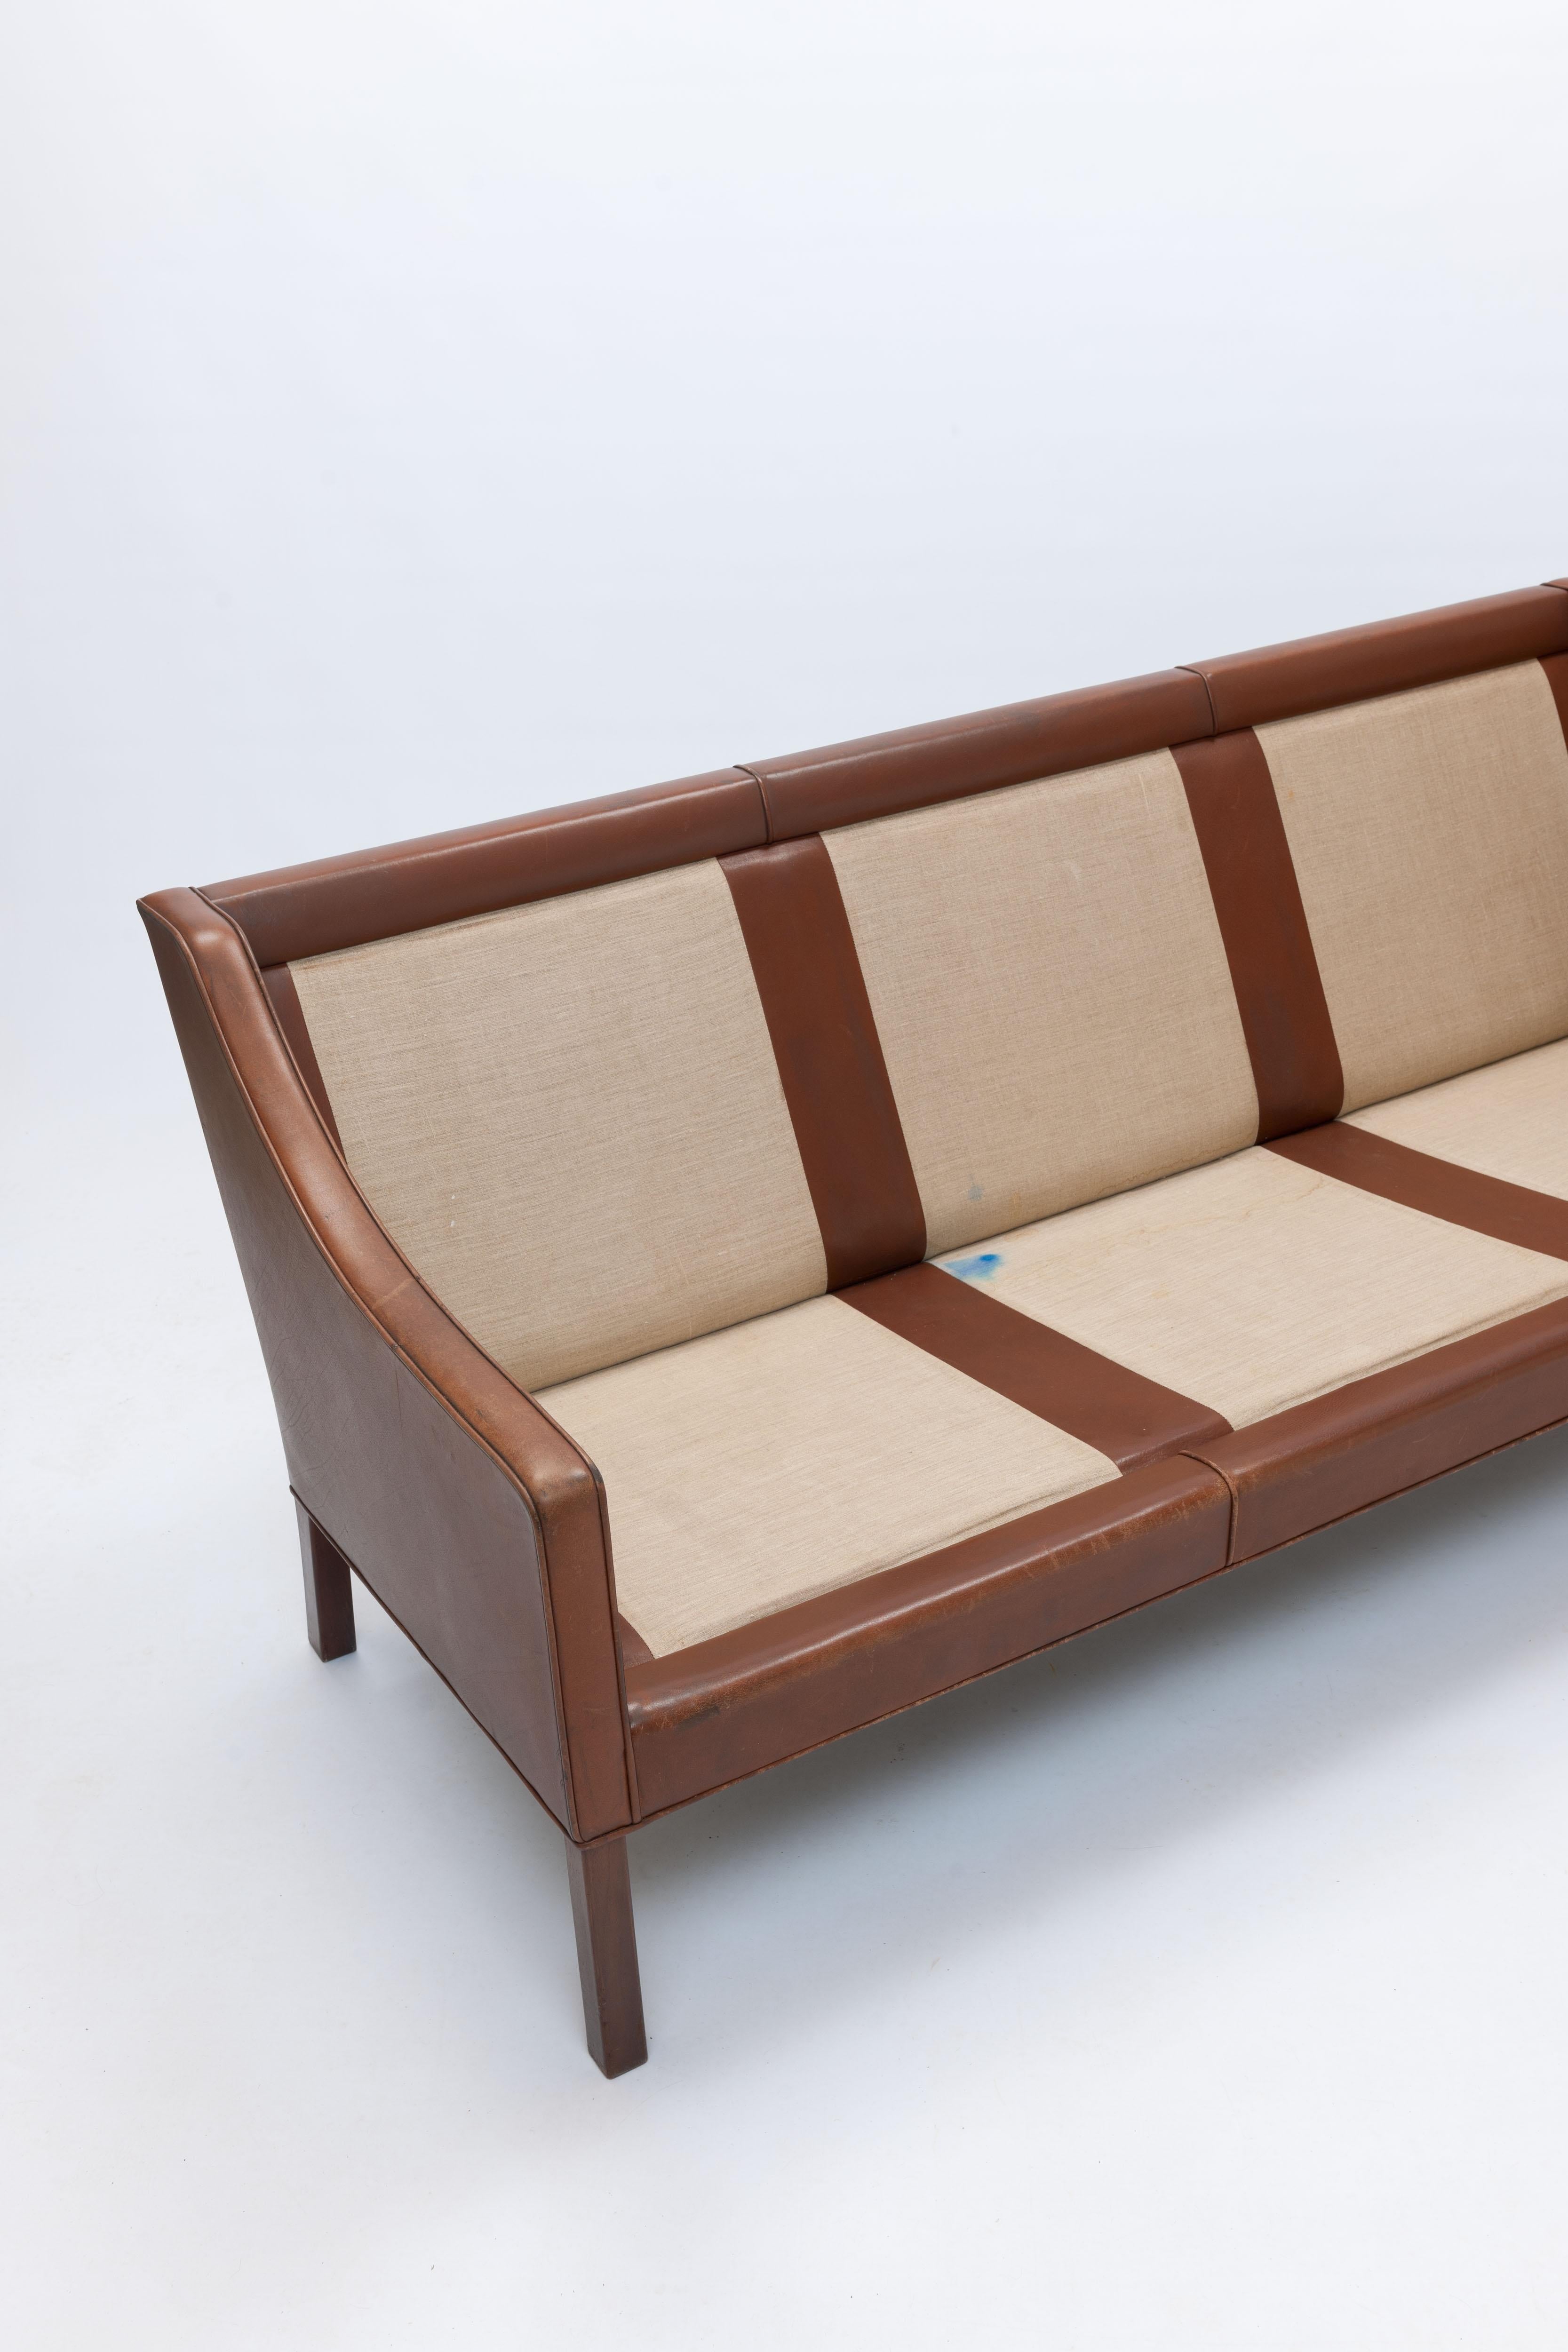 Borge Mogensen, Brown Leather Model 2208 Three Seat Sofa by Frederica  10